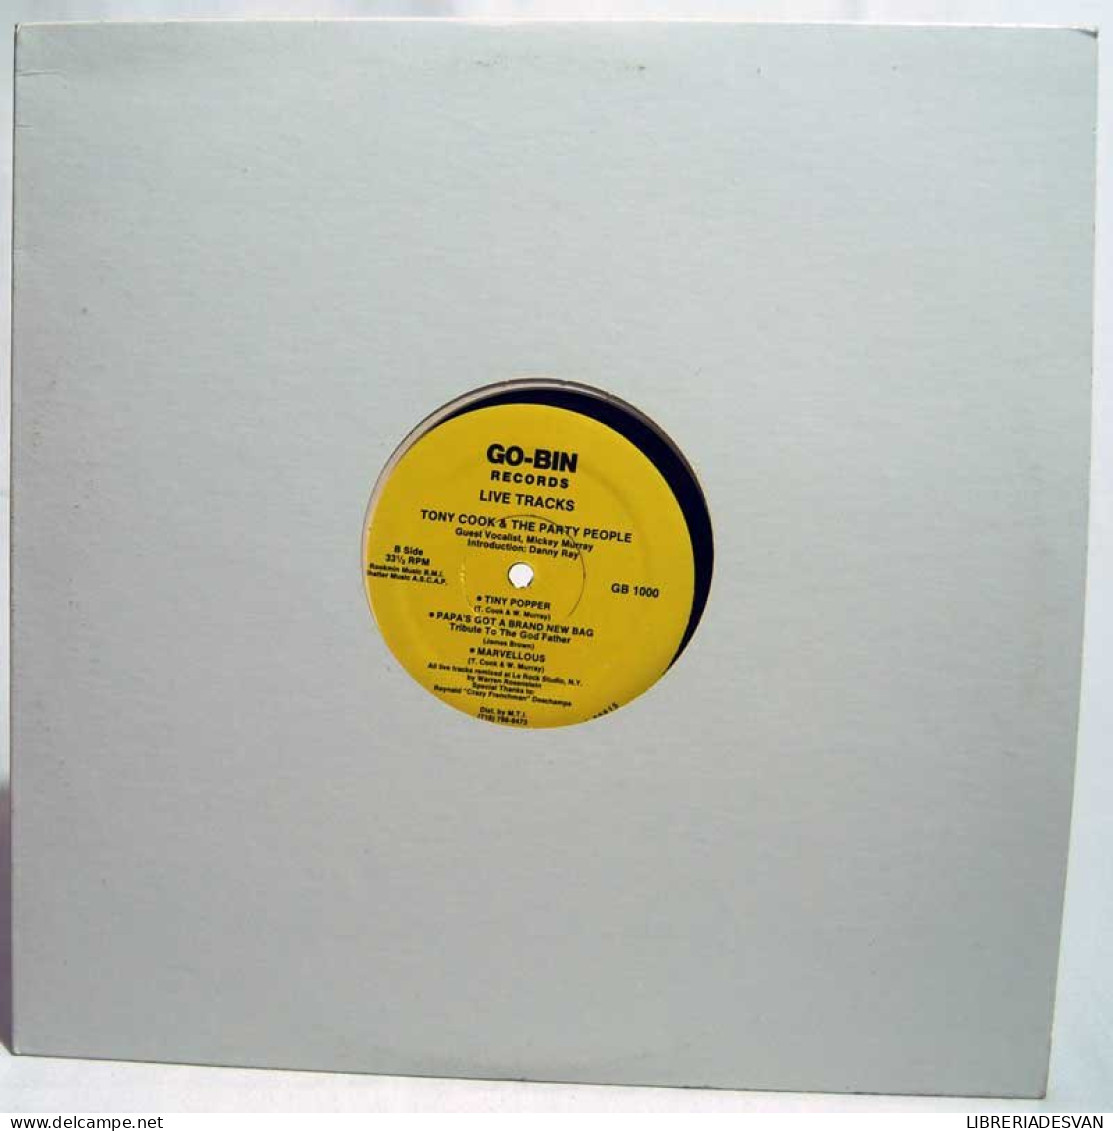 Tony Cook & The Party People - On The Floor 1991 / Live Tracks. Maxi Single - 45 Rpm - Maxi-Single